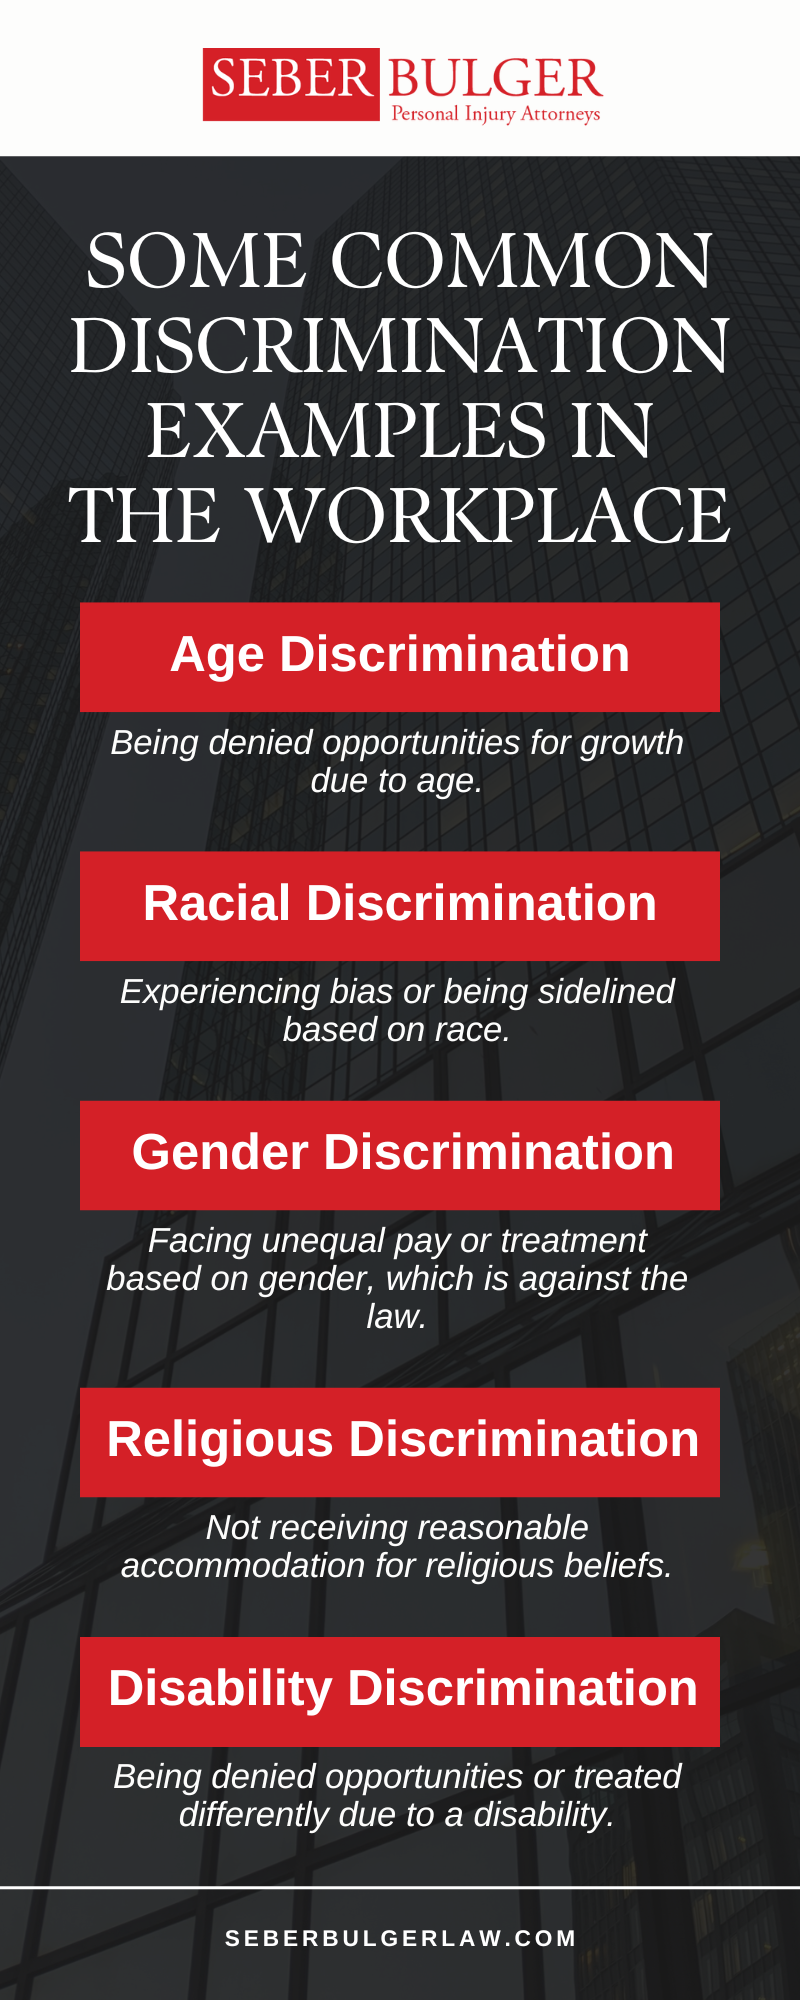 Some Common Discrimination Examples In The Workplace Infographic